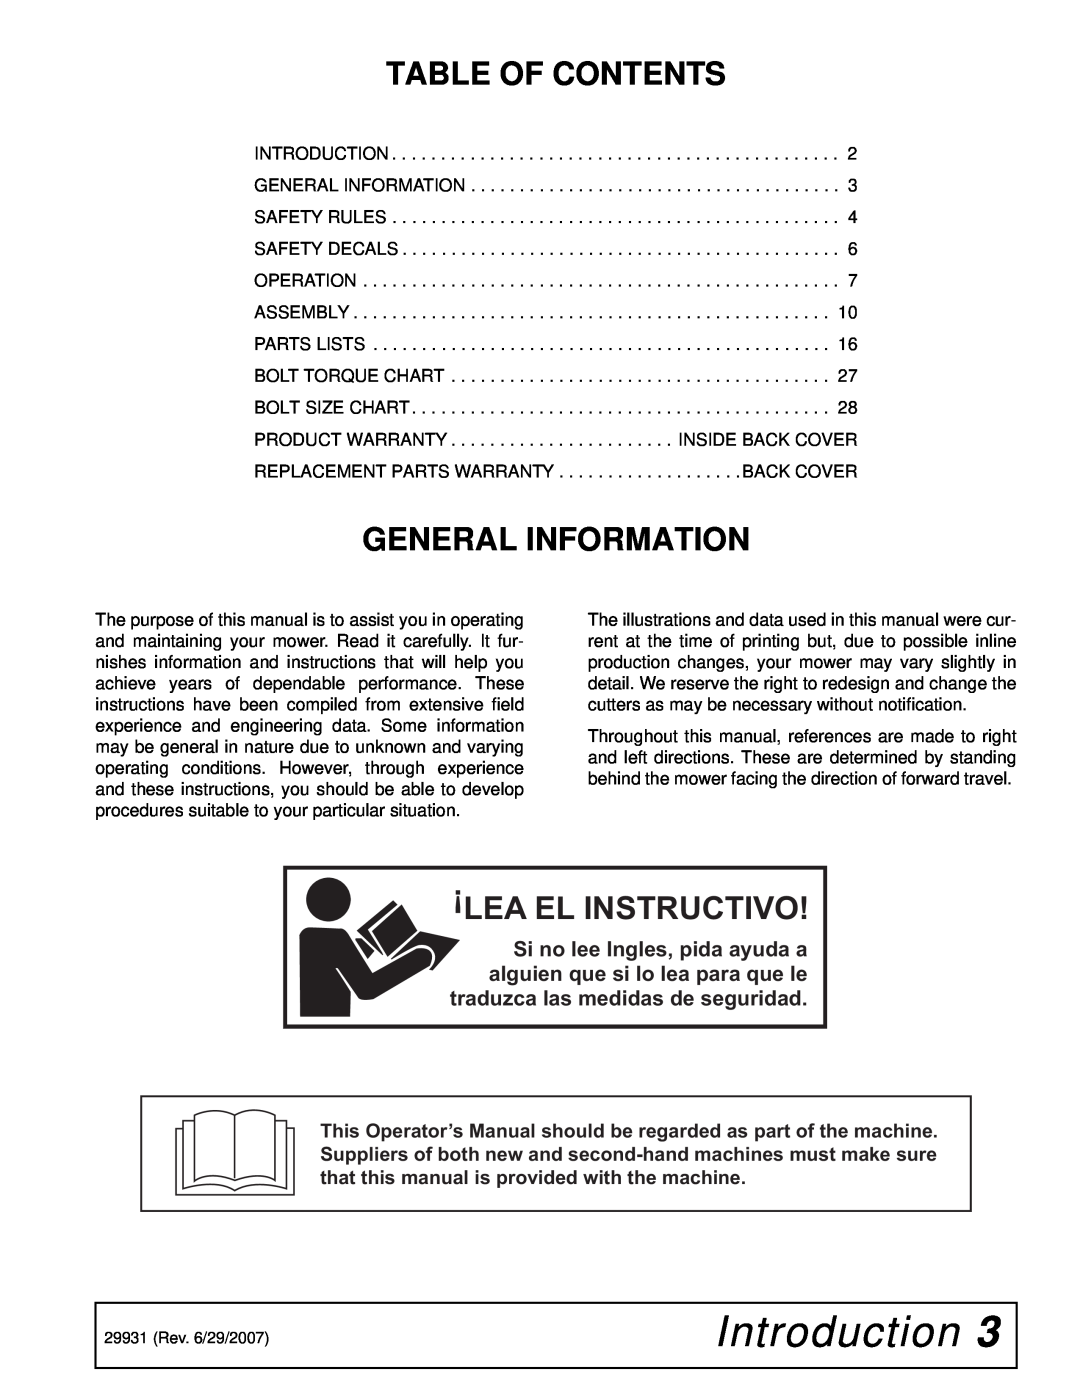 Woods Equipment 59HC-1 manual Introduction, Table Of Contents, General Information, Lea El Instructivo 